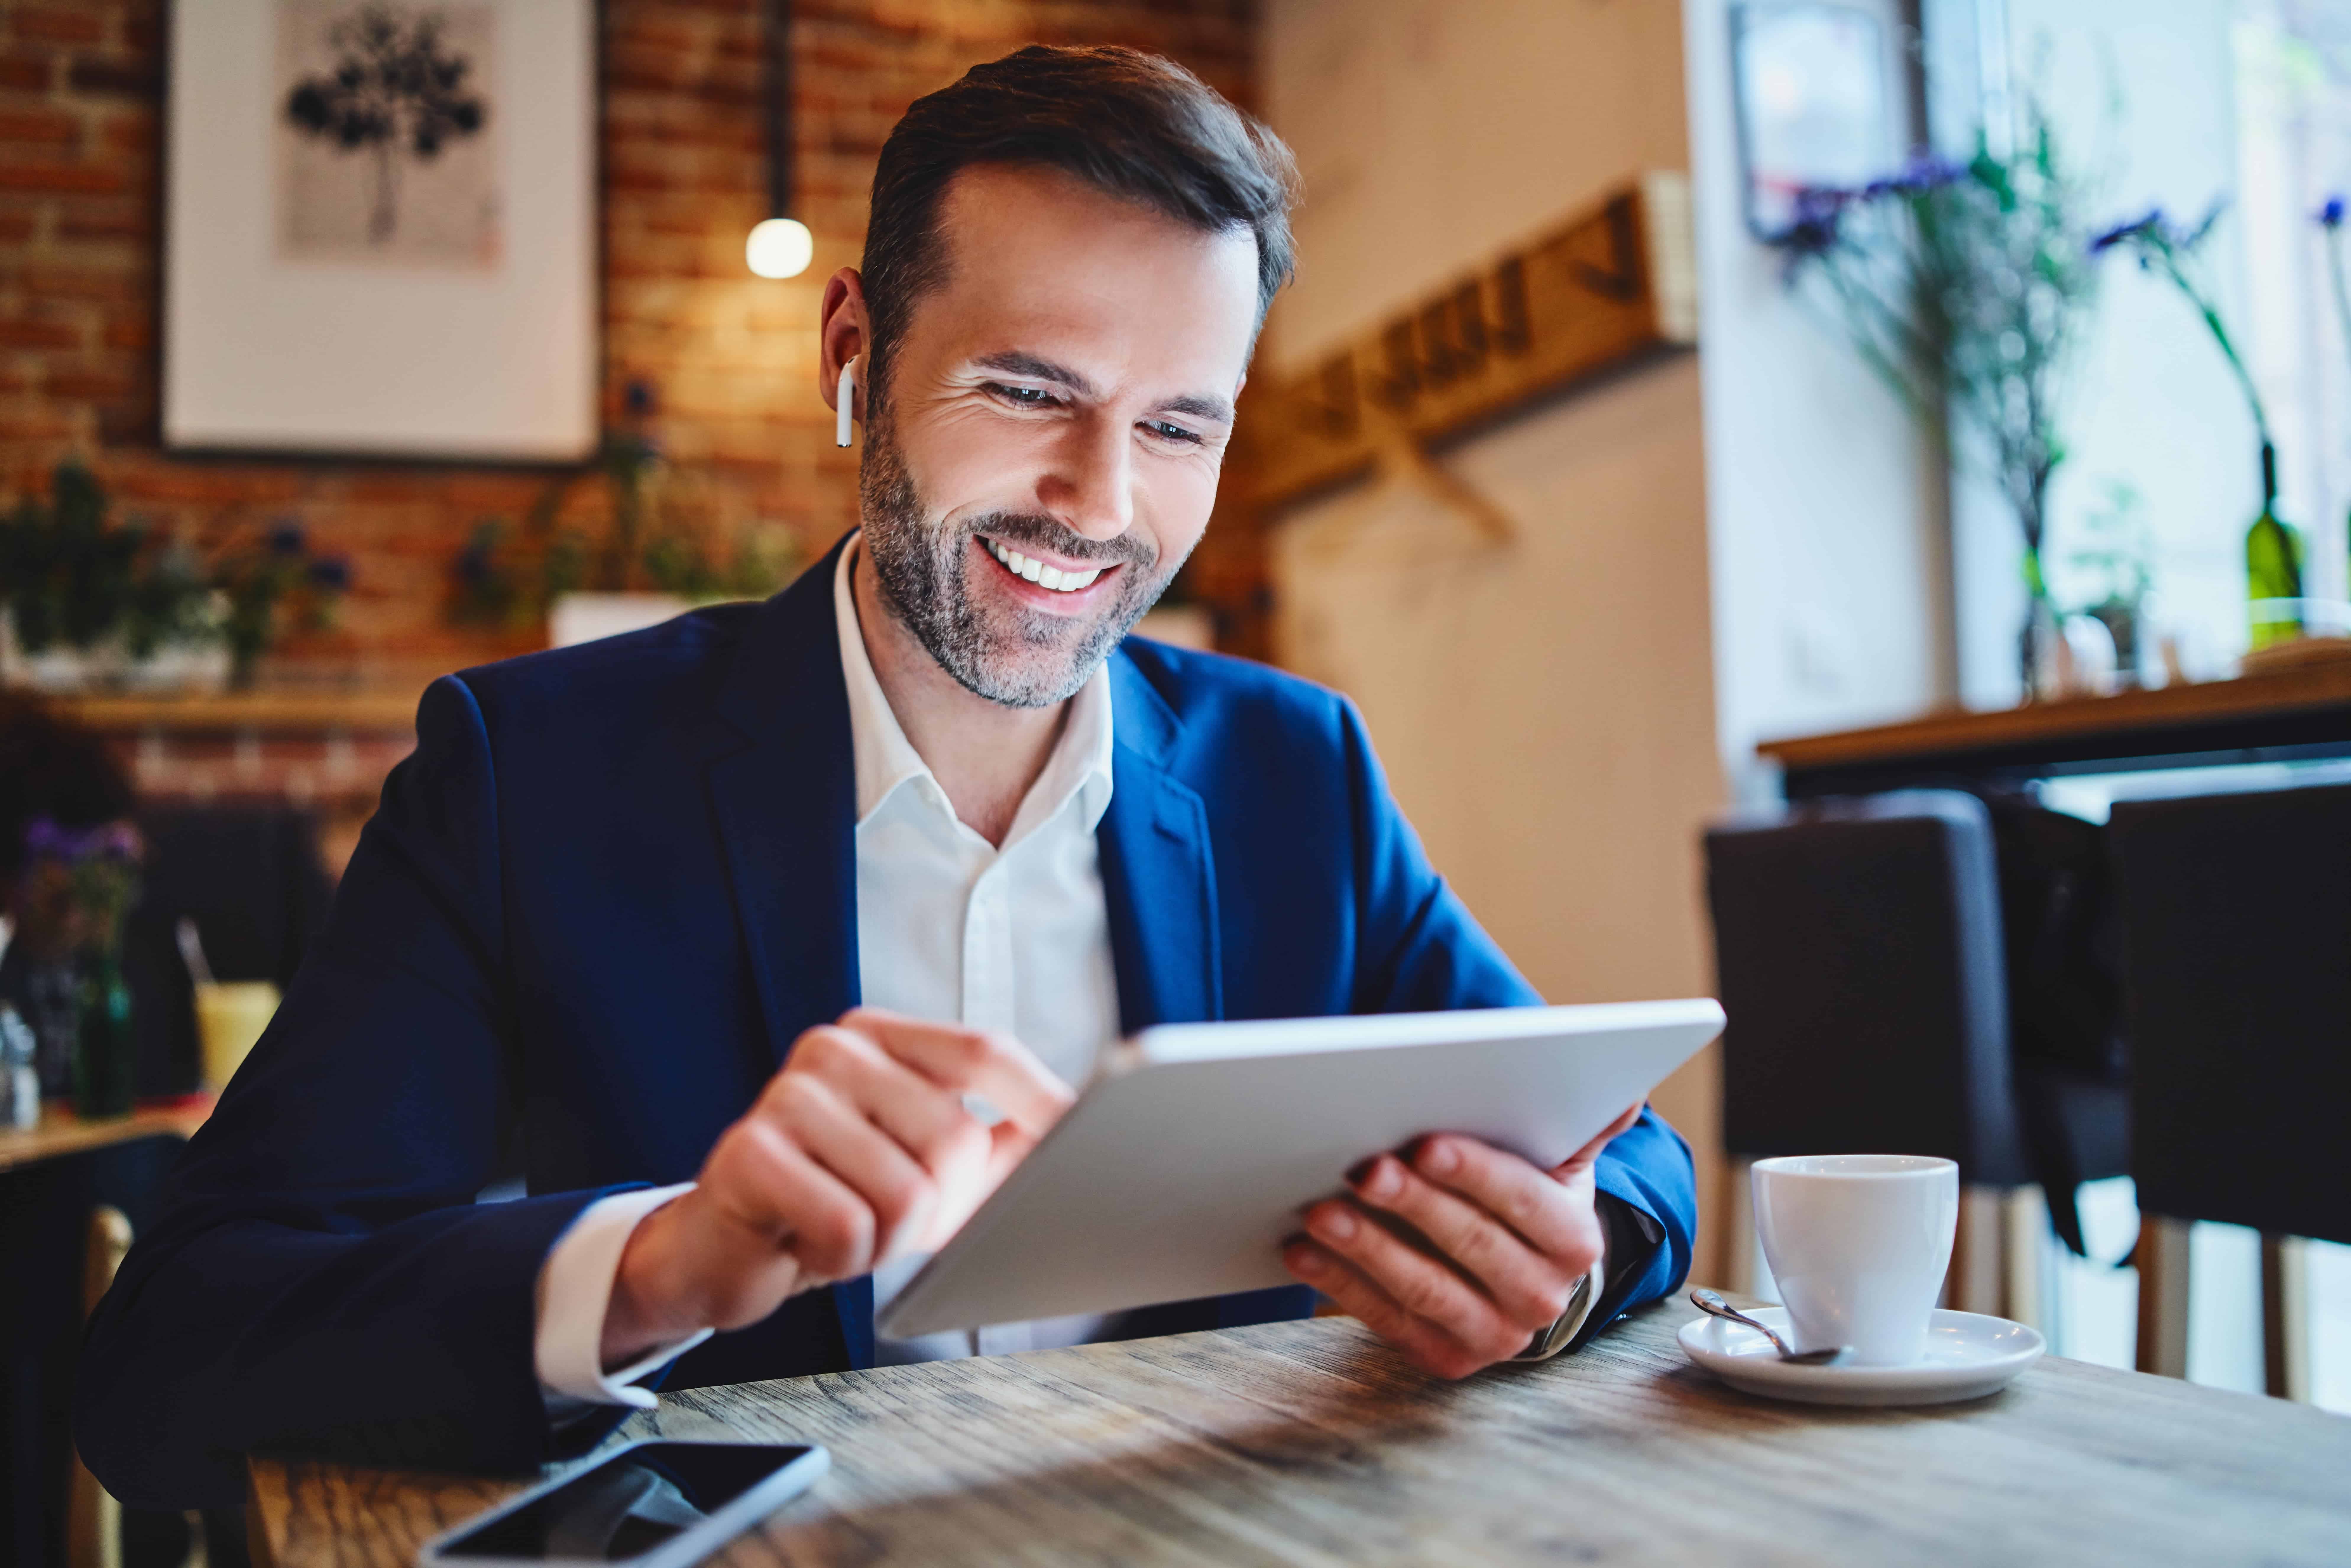 Man smiling while reviewing information on tablet